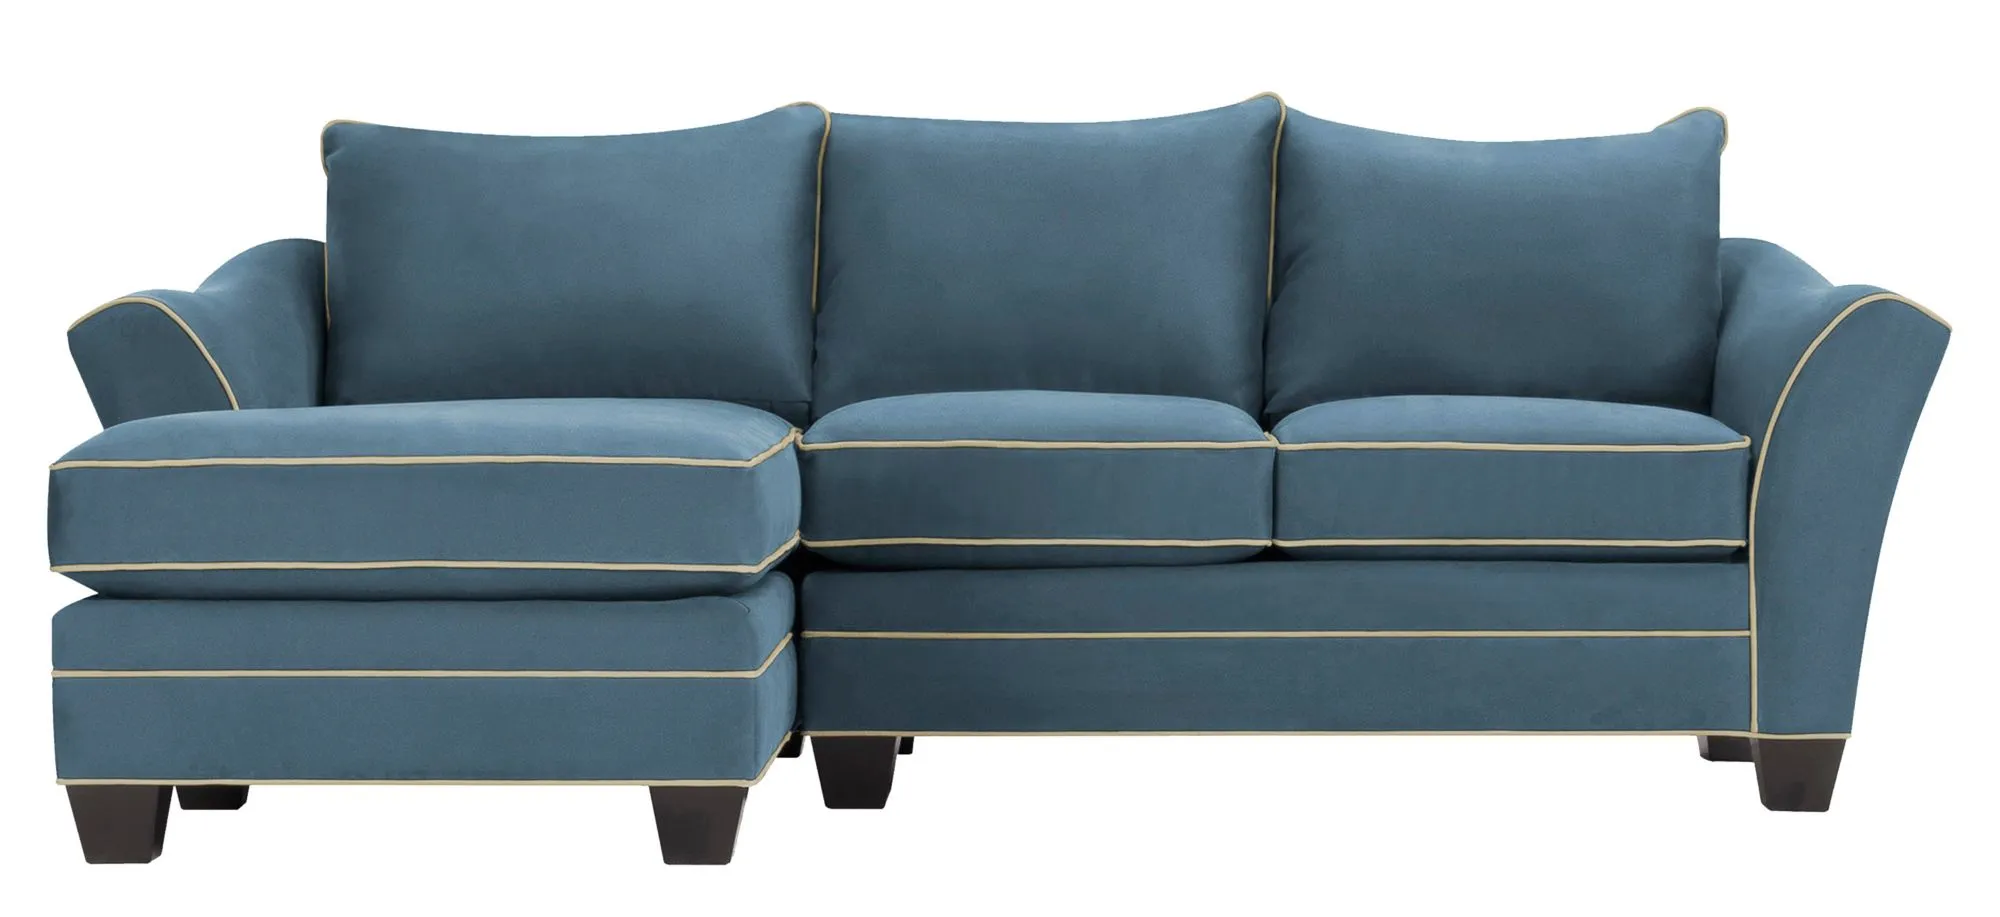 Foresthill 2-pc. Left Hand Chaise Sectional Sofa in Suede So Soft Indigo/Mineral by H.M. Richards